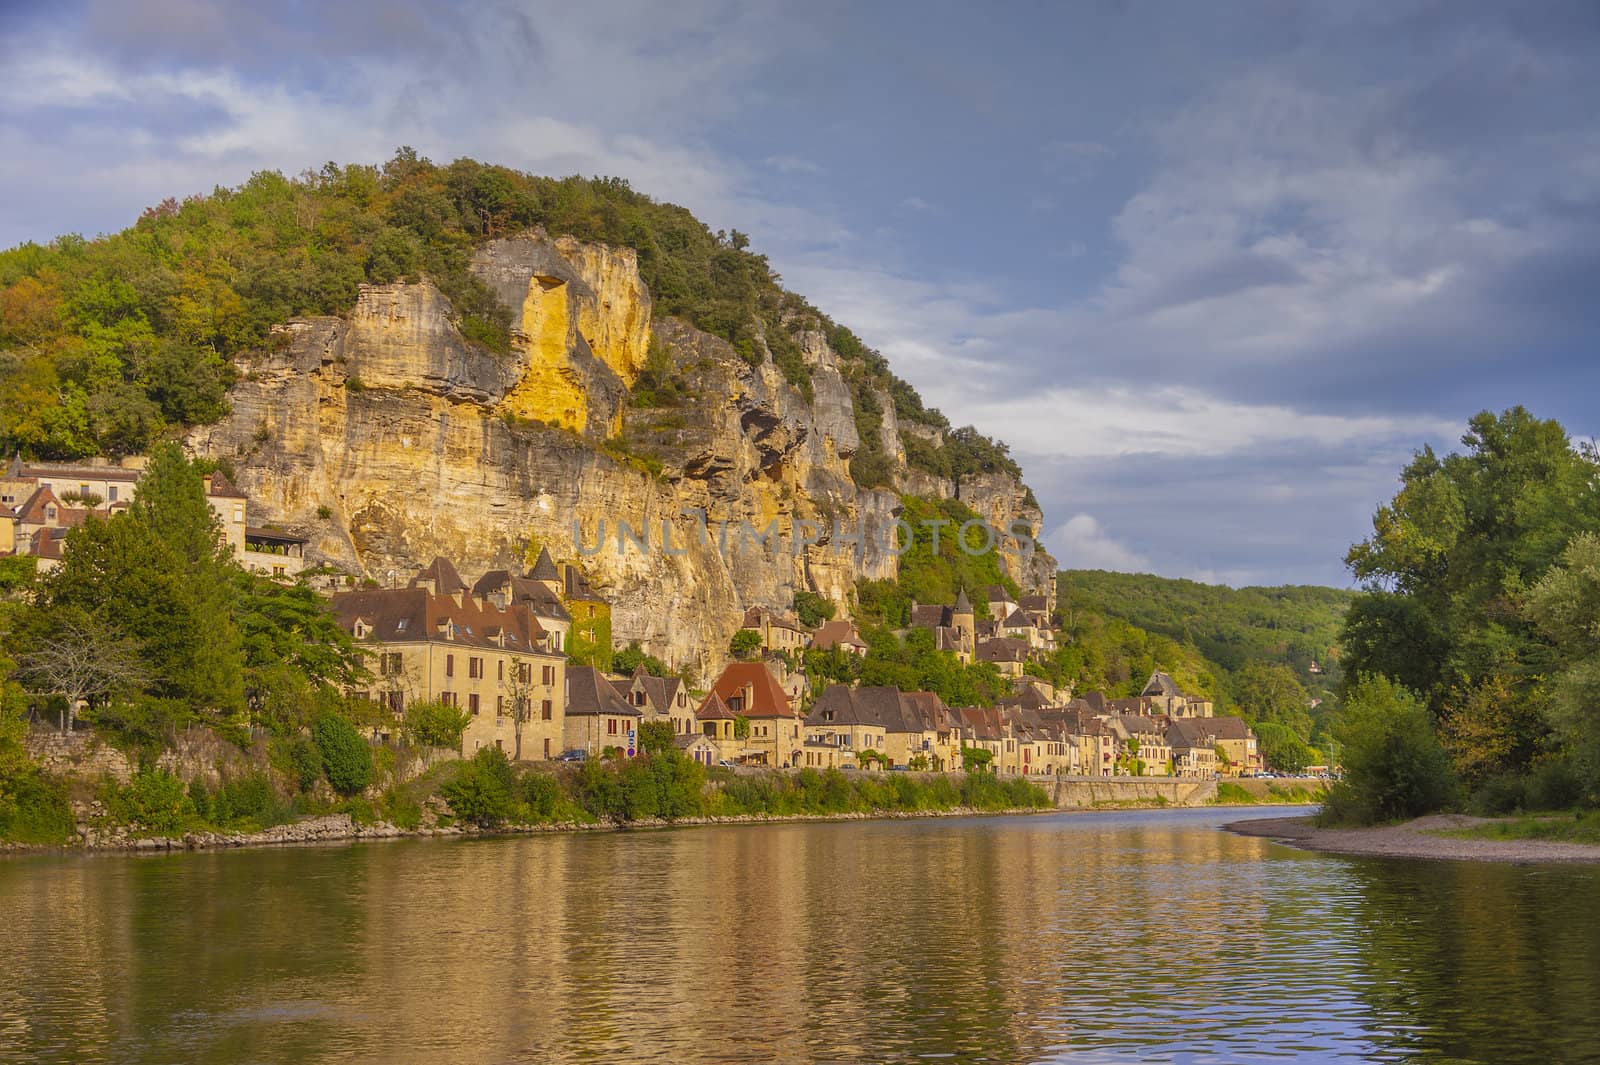 Medieval village of Roc Gageac on the Dordogne river in France